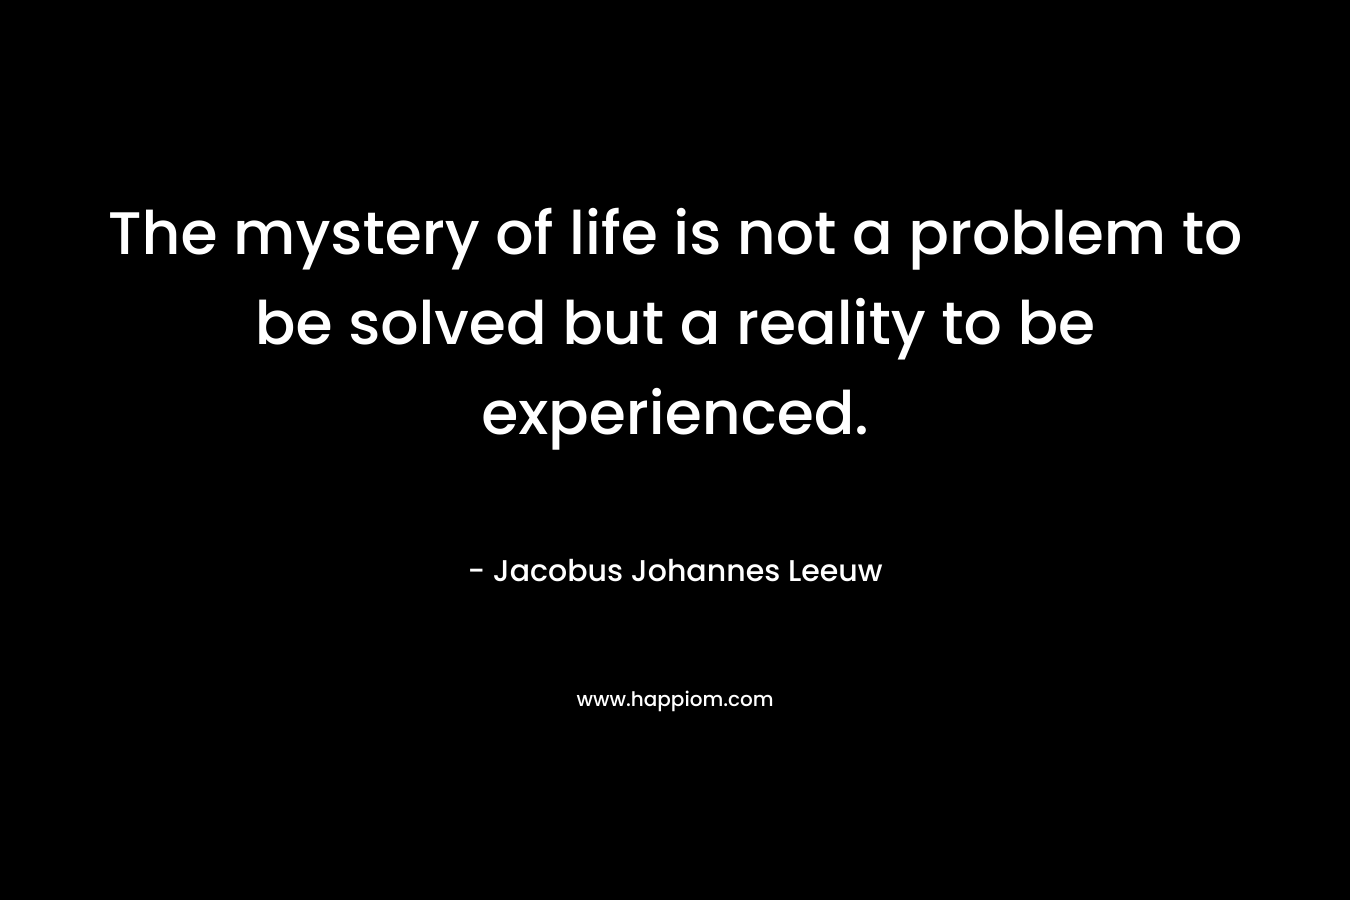 The mystery of life is not a problem to be solved but a reality to be experienced. – Jacobus Johannes Leeuw